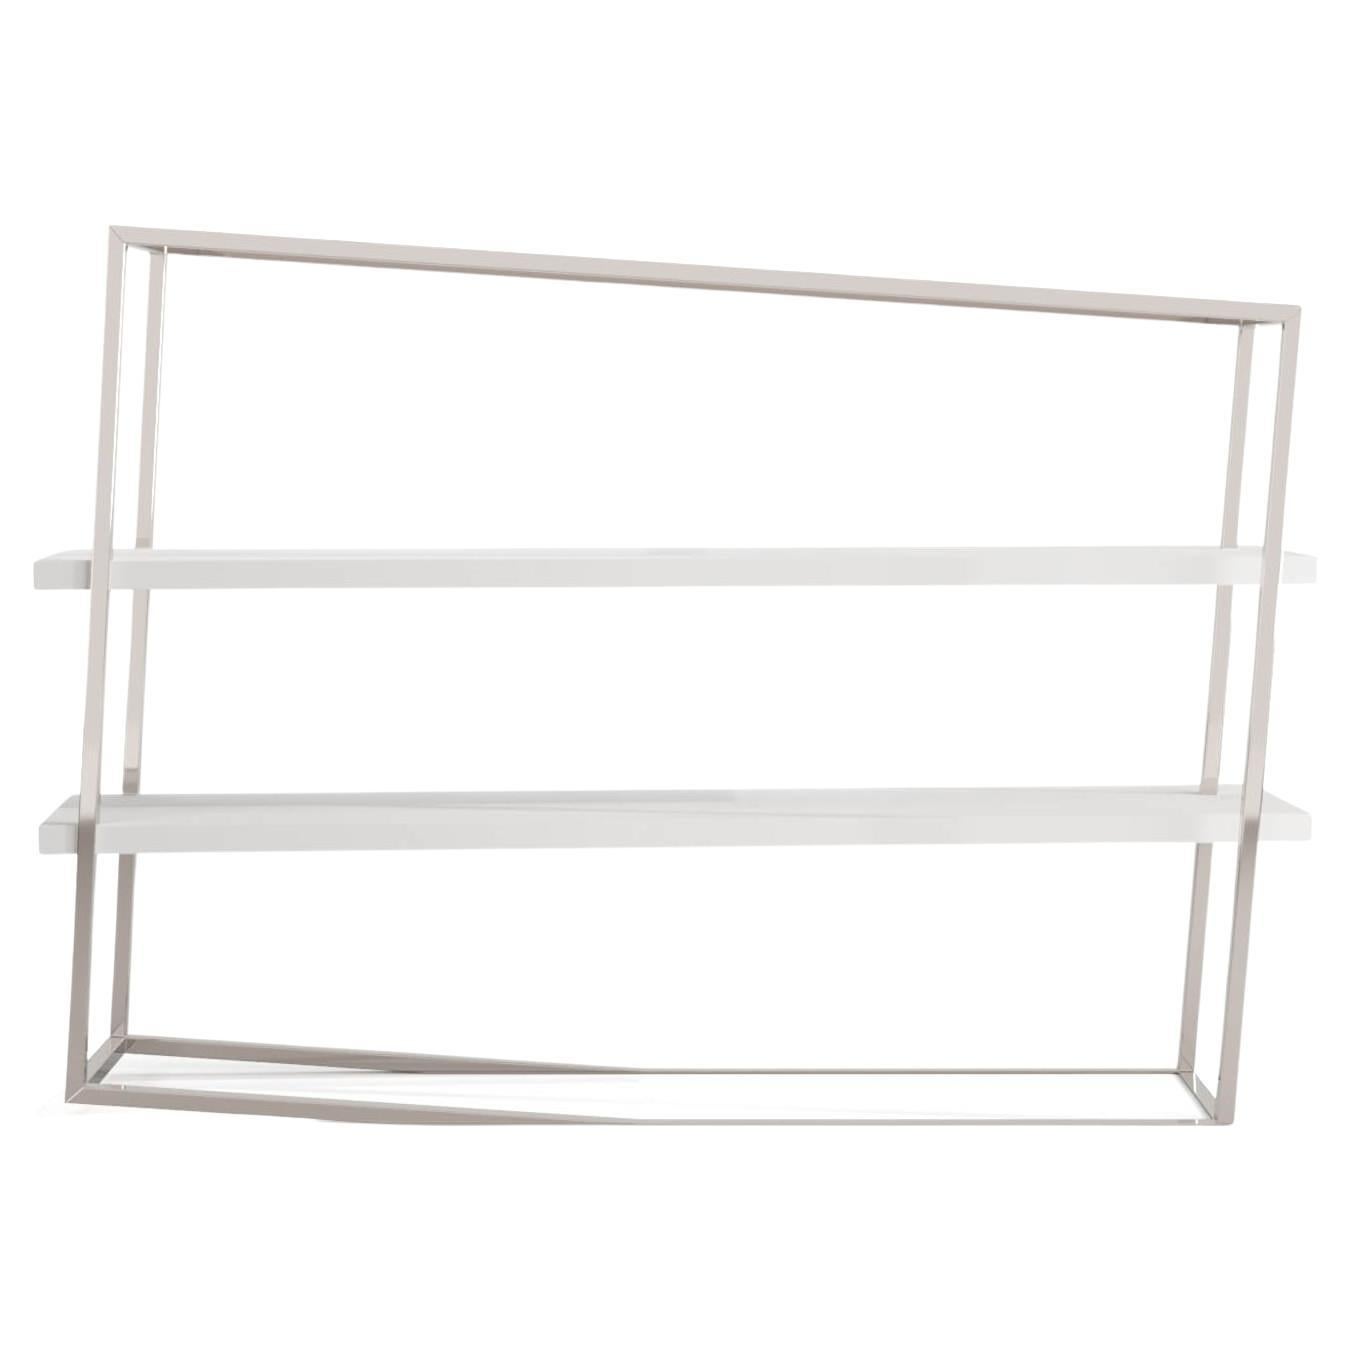 Modern Accent Bookcase with Shelves in White Lacquer and Brushed Stainless Steel